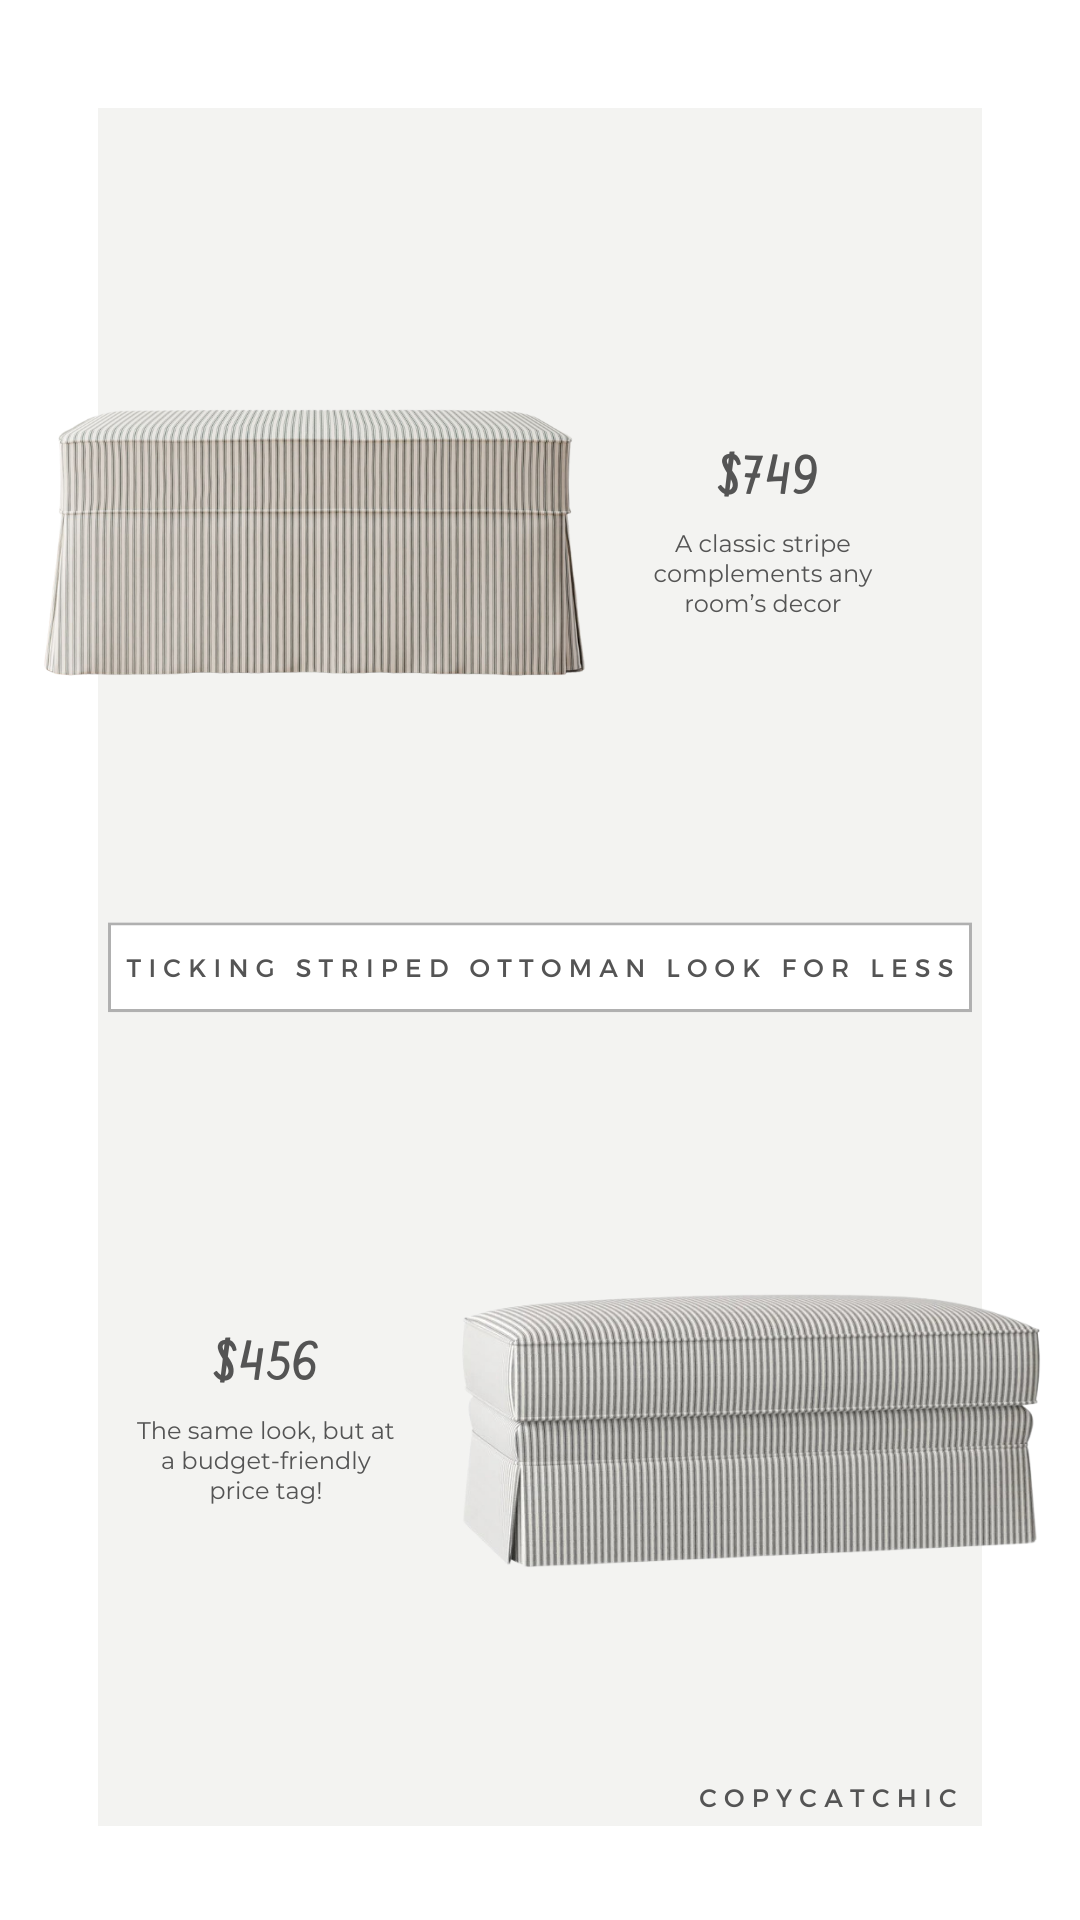 Daily Find: ticking stripe upholstered ottoman Pottery Barn Charleston Slipcovered Ottoman vs Wayfair Kelly Clarkson Negley Upholstered Ottoman, look for less, copycatchic luxe living for less, budget home decor and design, daily dupes, home trends, sales, budget travel and room inspiration